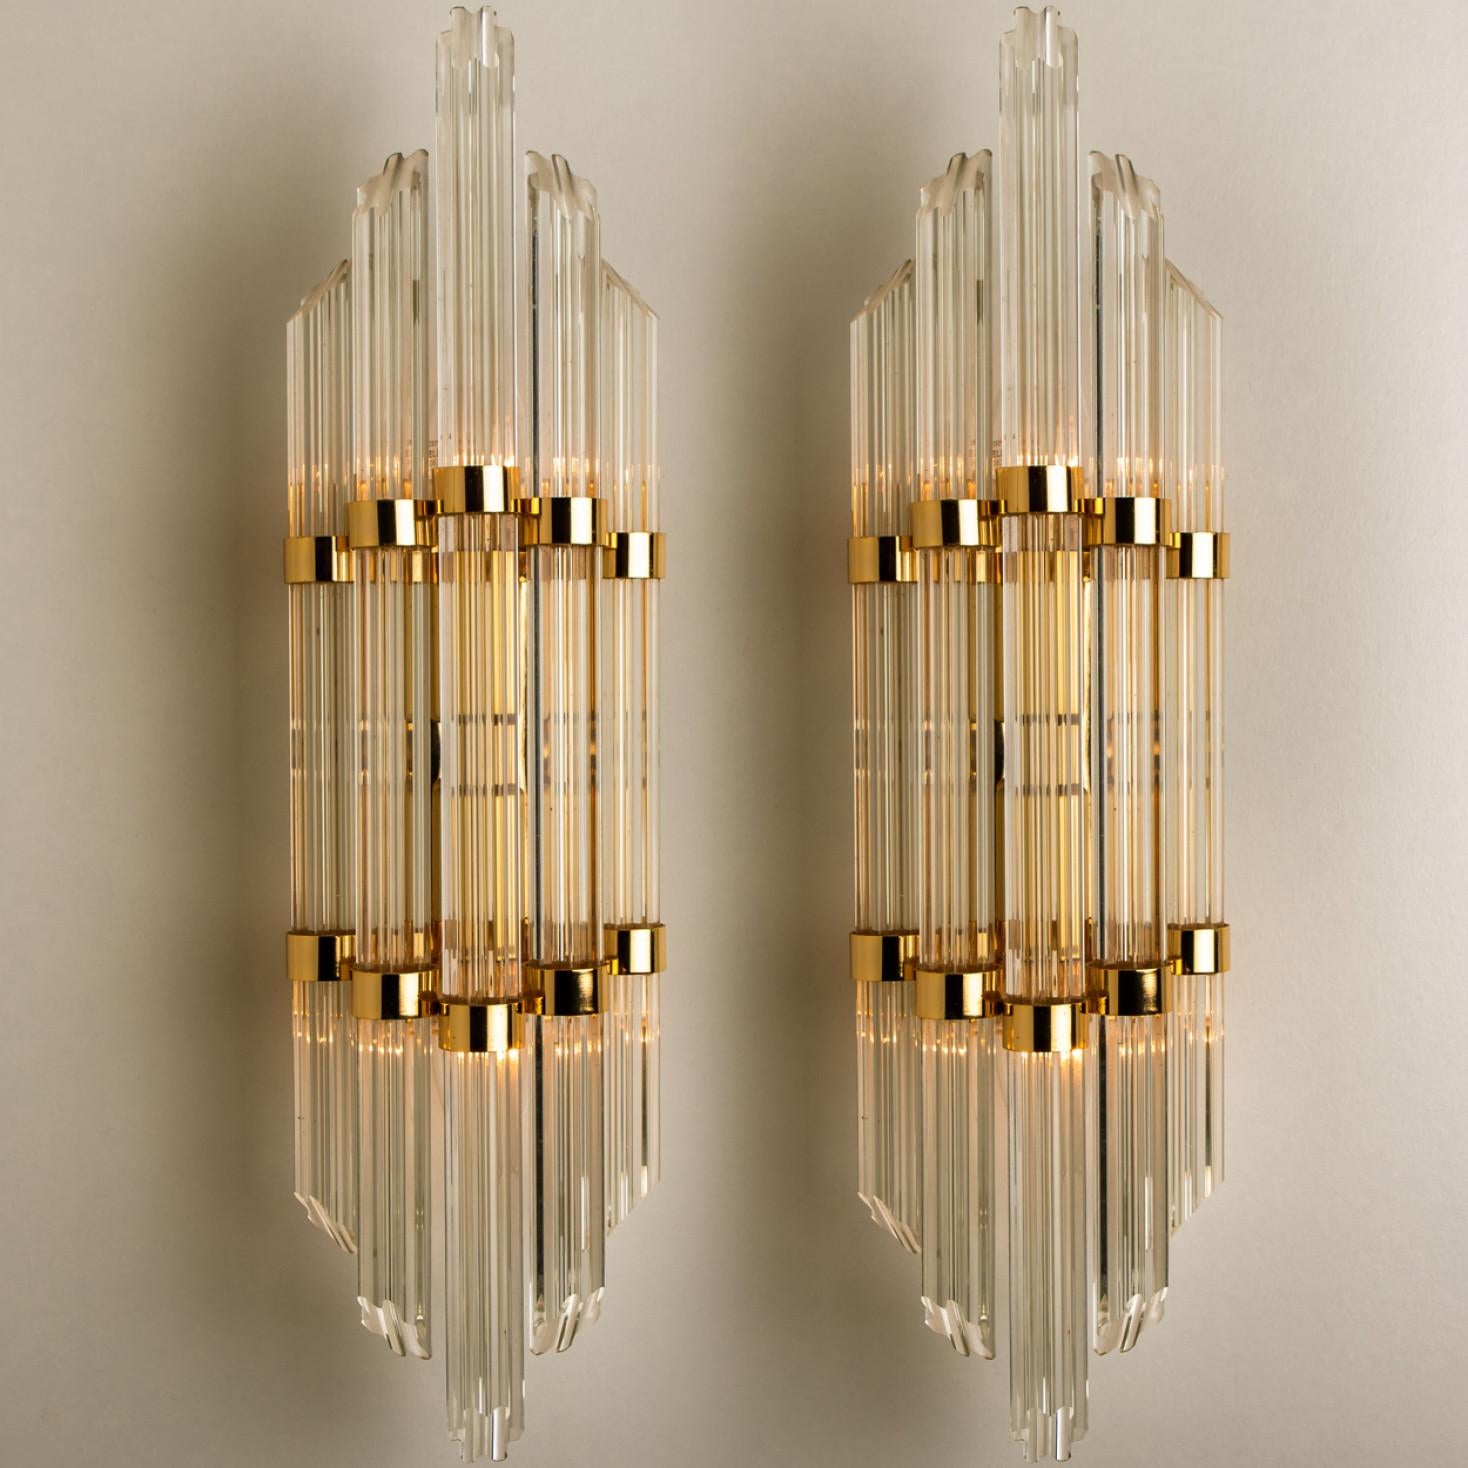 Italian Modern Flower Shaped Glass Rod Wall Sconces in style of Sciolari For Sale